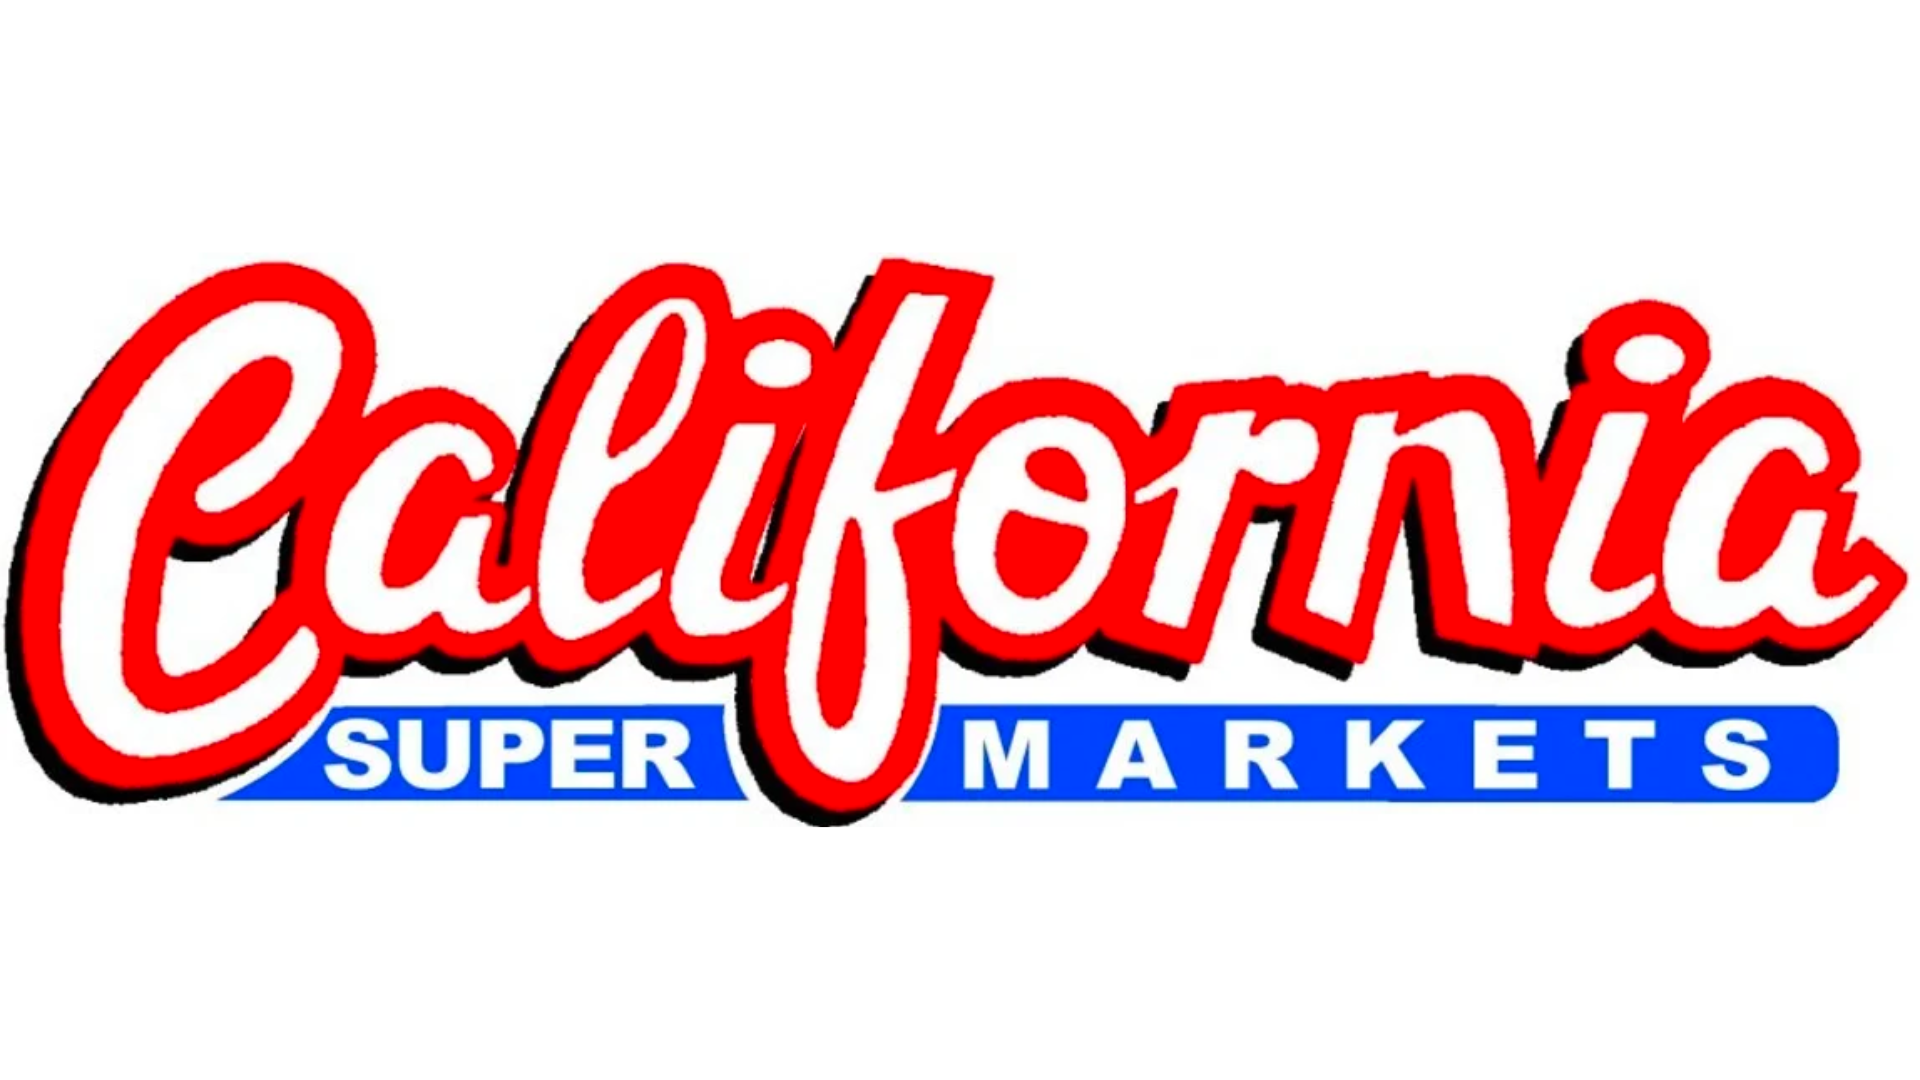 Red and blue 'California Supermarket' logo on a white background